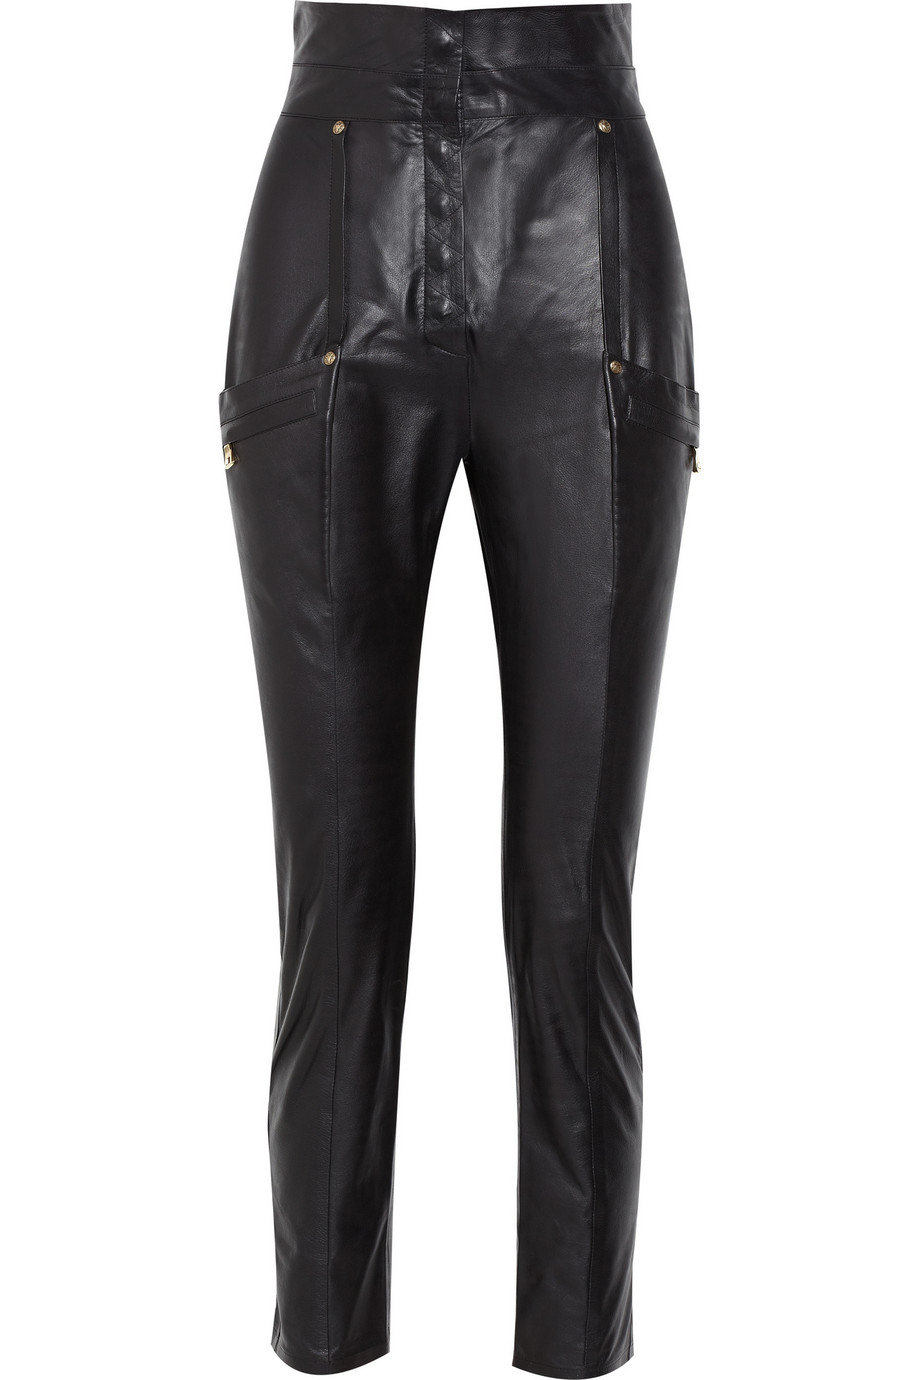 Lyst - Balmain High-Waisted Leather Skinny Pants in Black